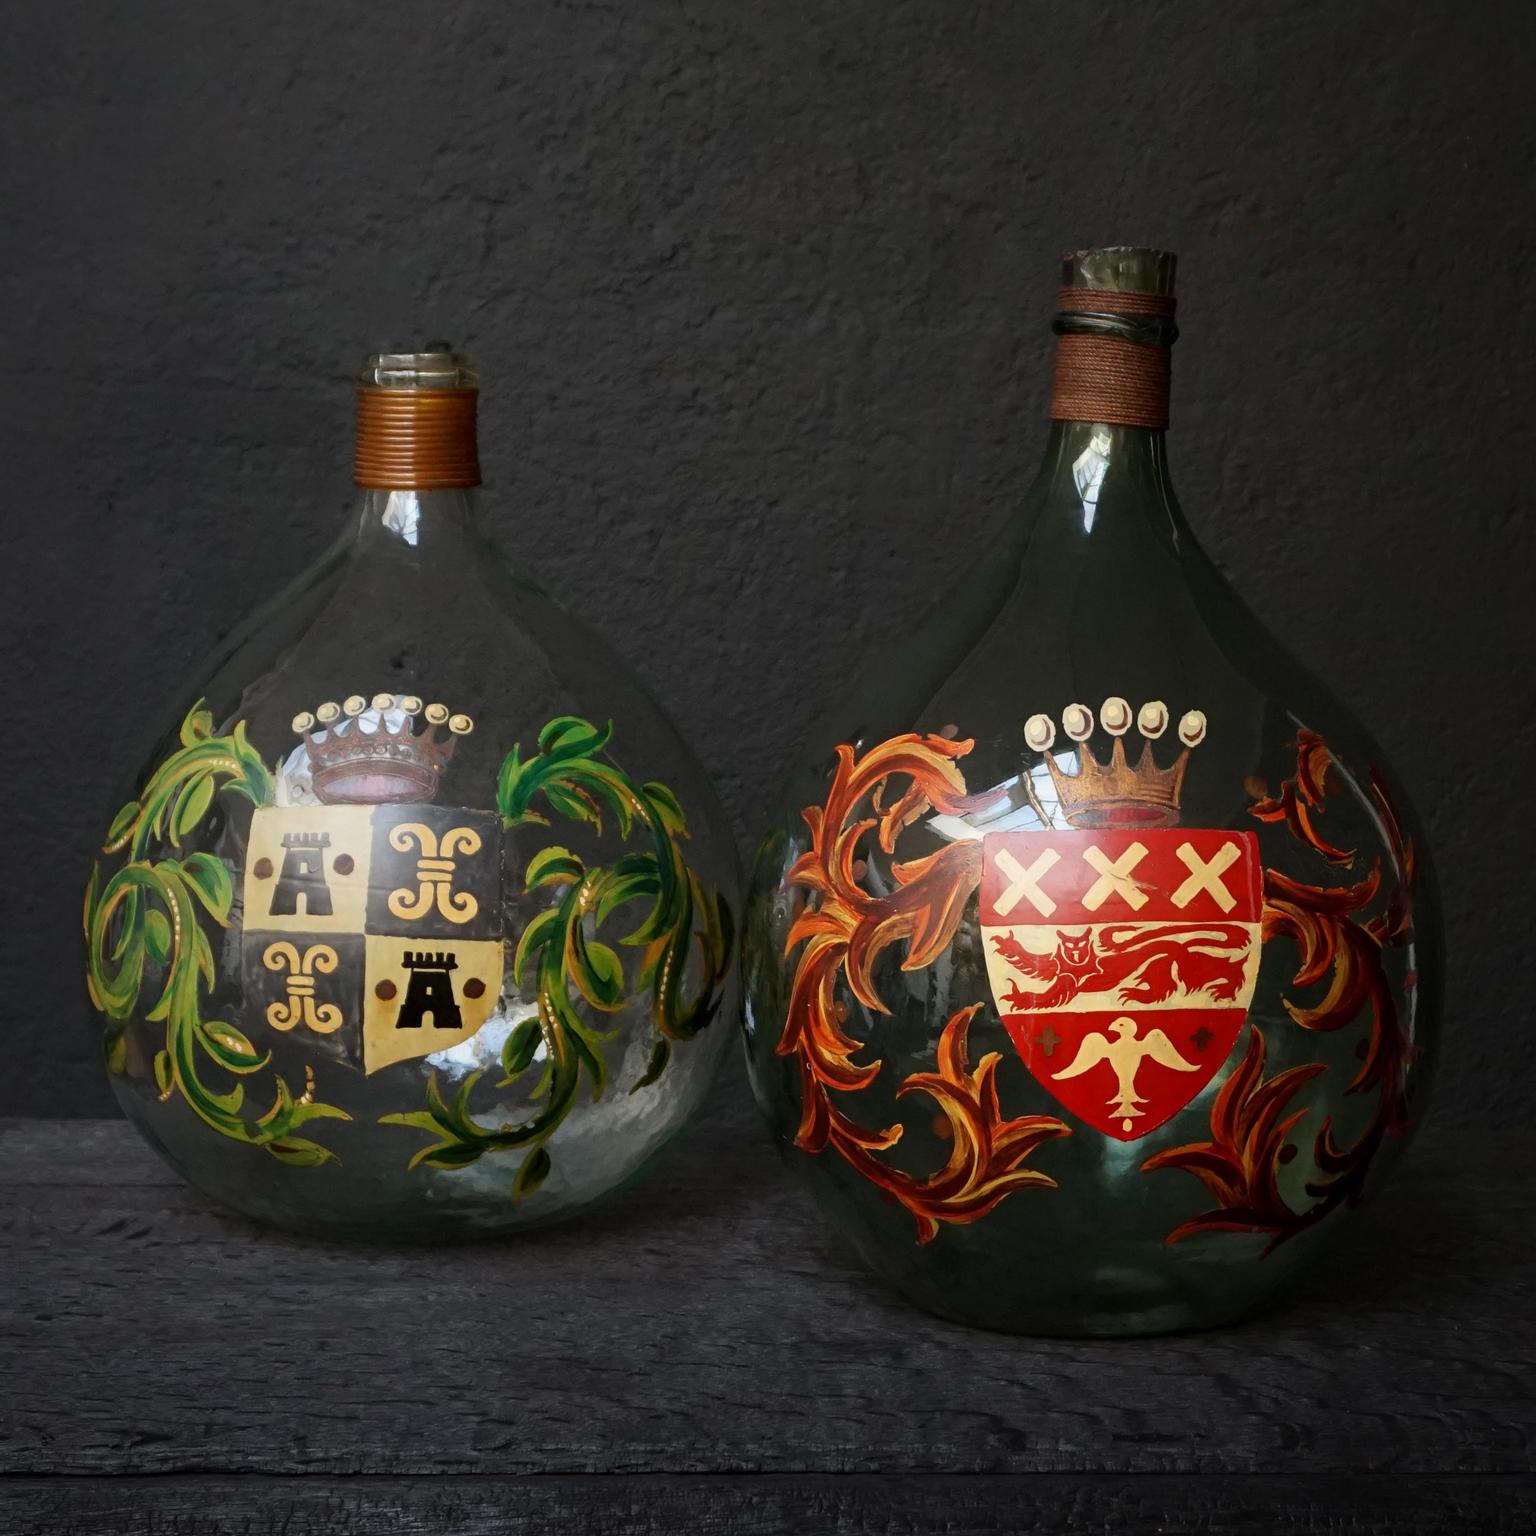 Set of Two 19th Century Large Handblown Demijohns with Painted Coat of Arms 2